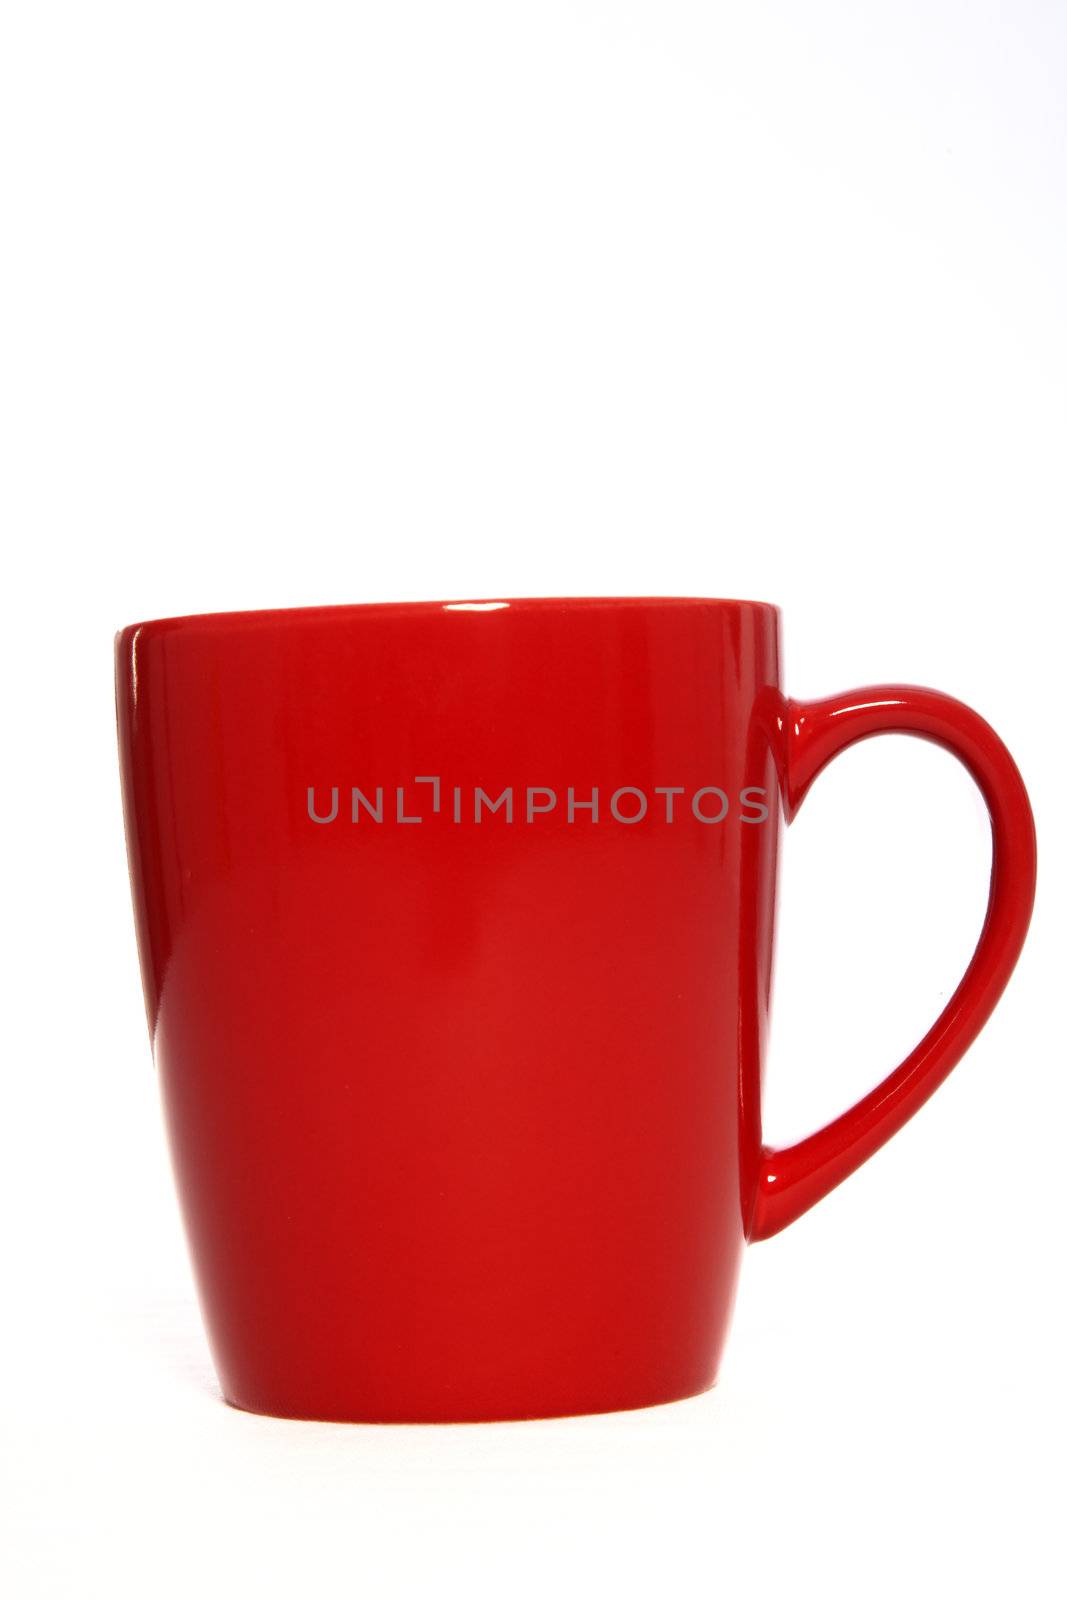 Closeup of a single red ceramic or pottery coffee mug isolated on white